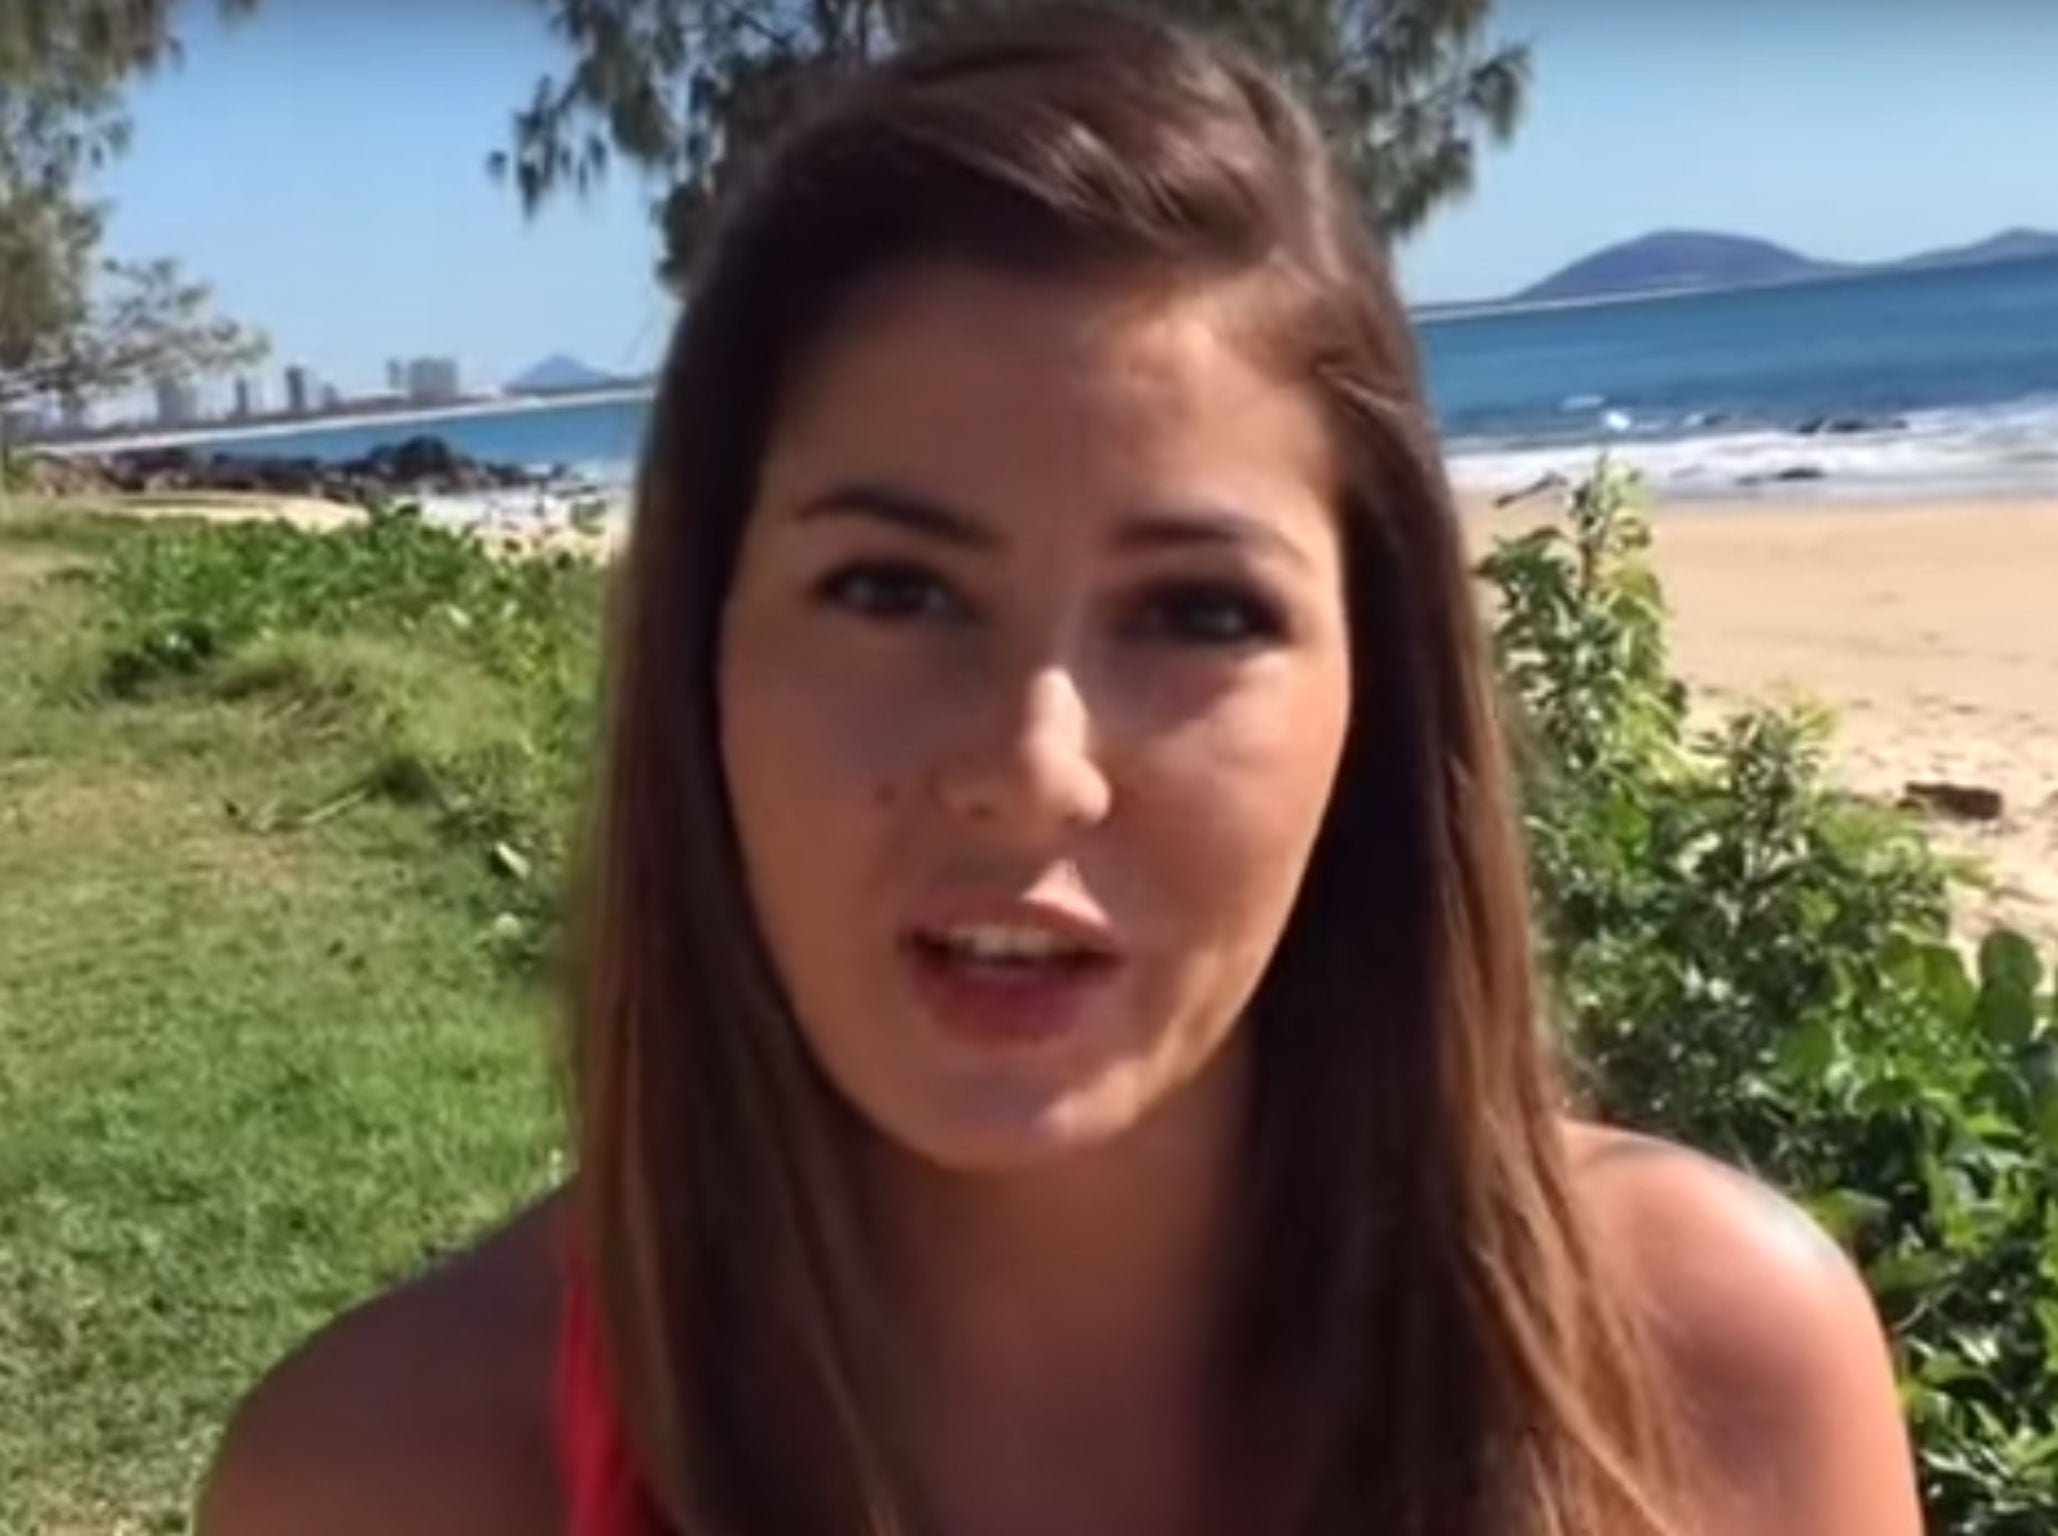 Natalie Amyot, who is searching for a man she met in Australia